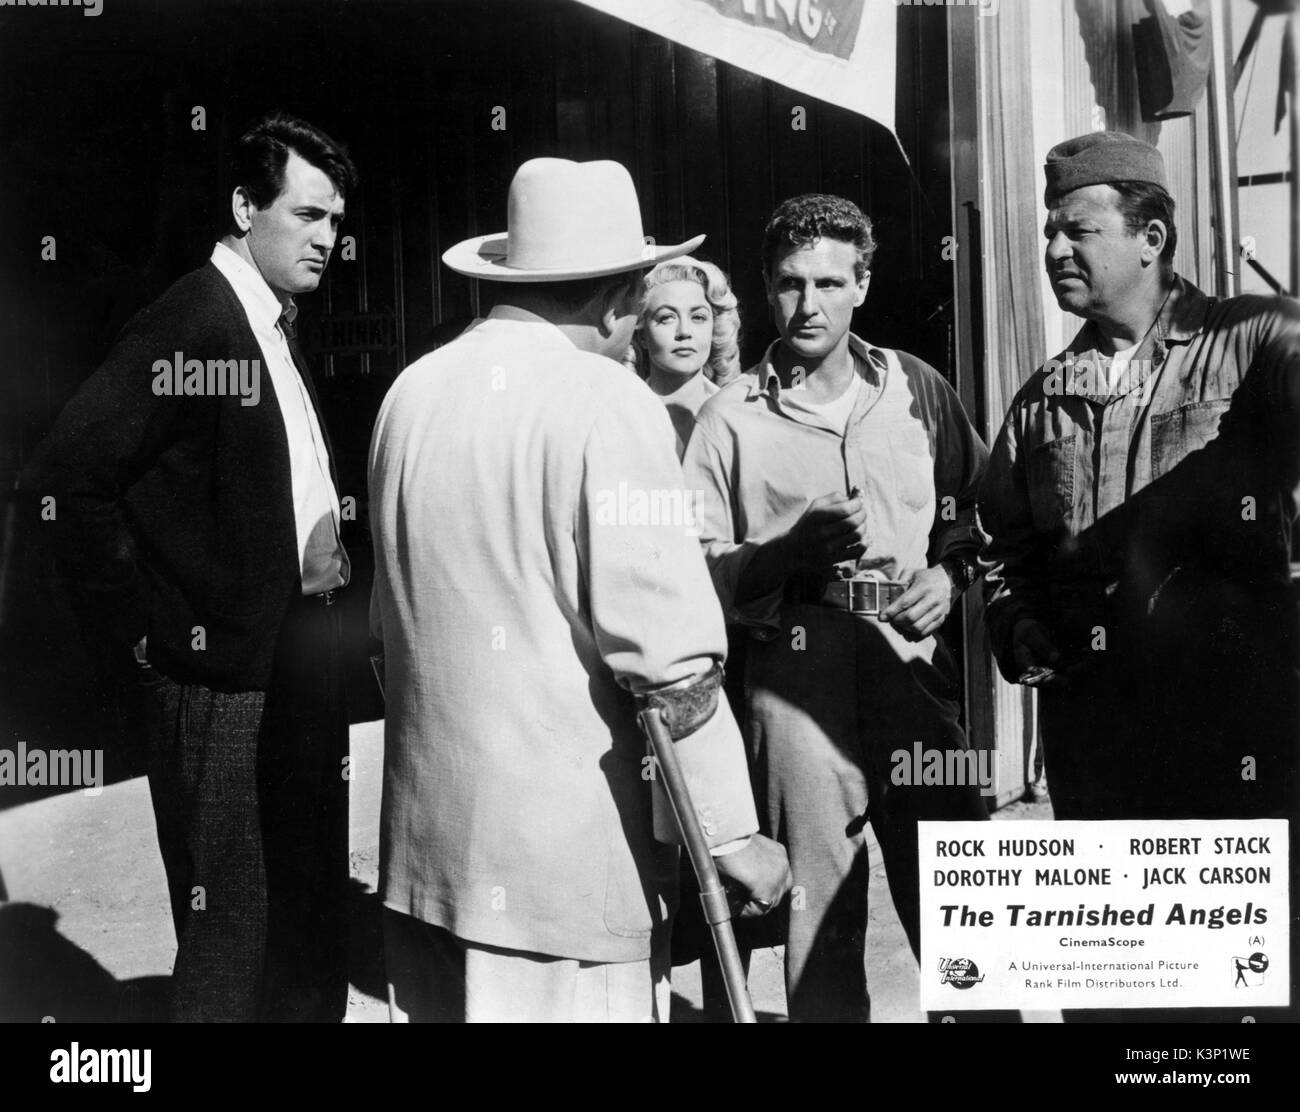 THE TARNISHED ANGELS [US 1957] ROCK HUDSON, DOROTHY MALONE, ROBERT STACK, JACK CARSON     Date: 1957 Stock Photo